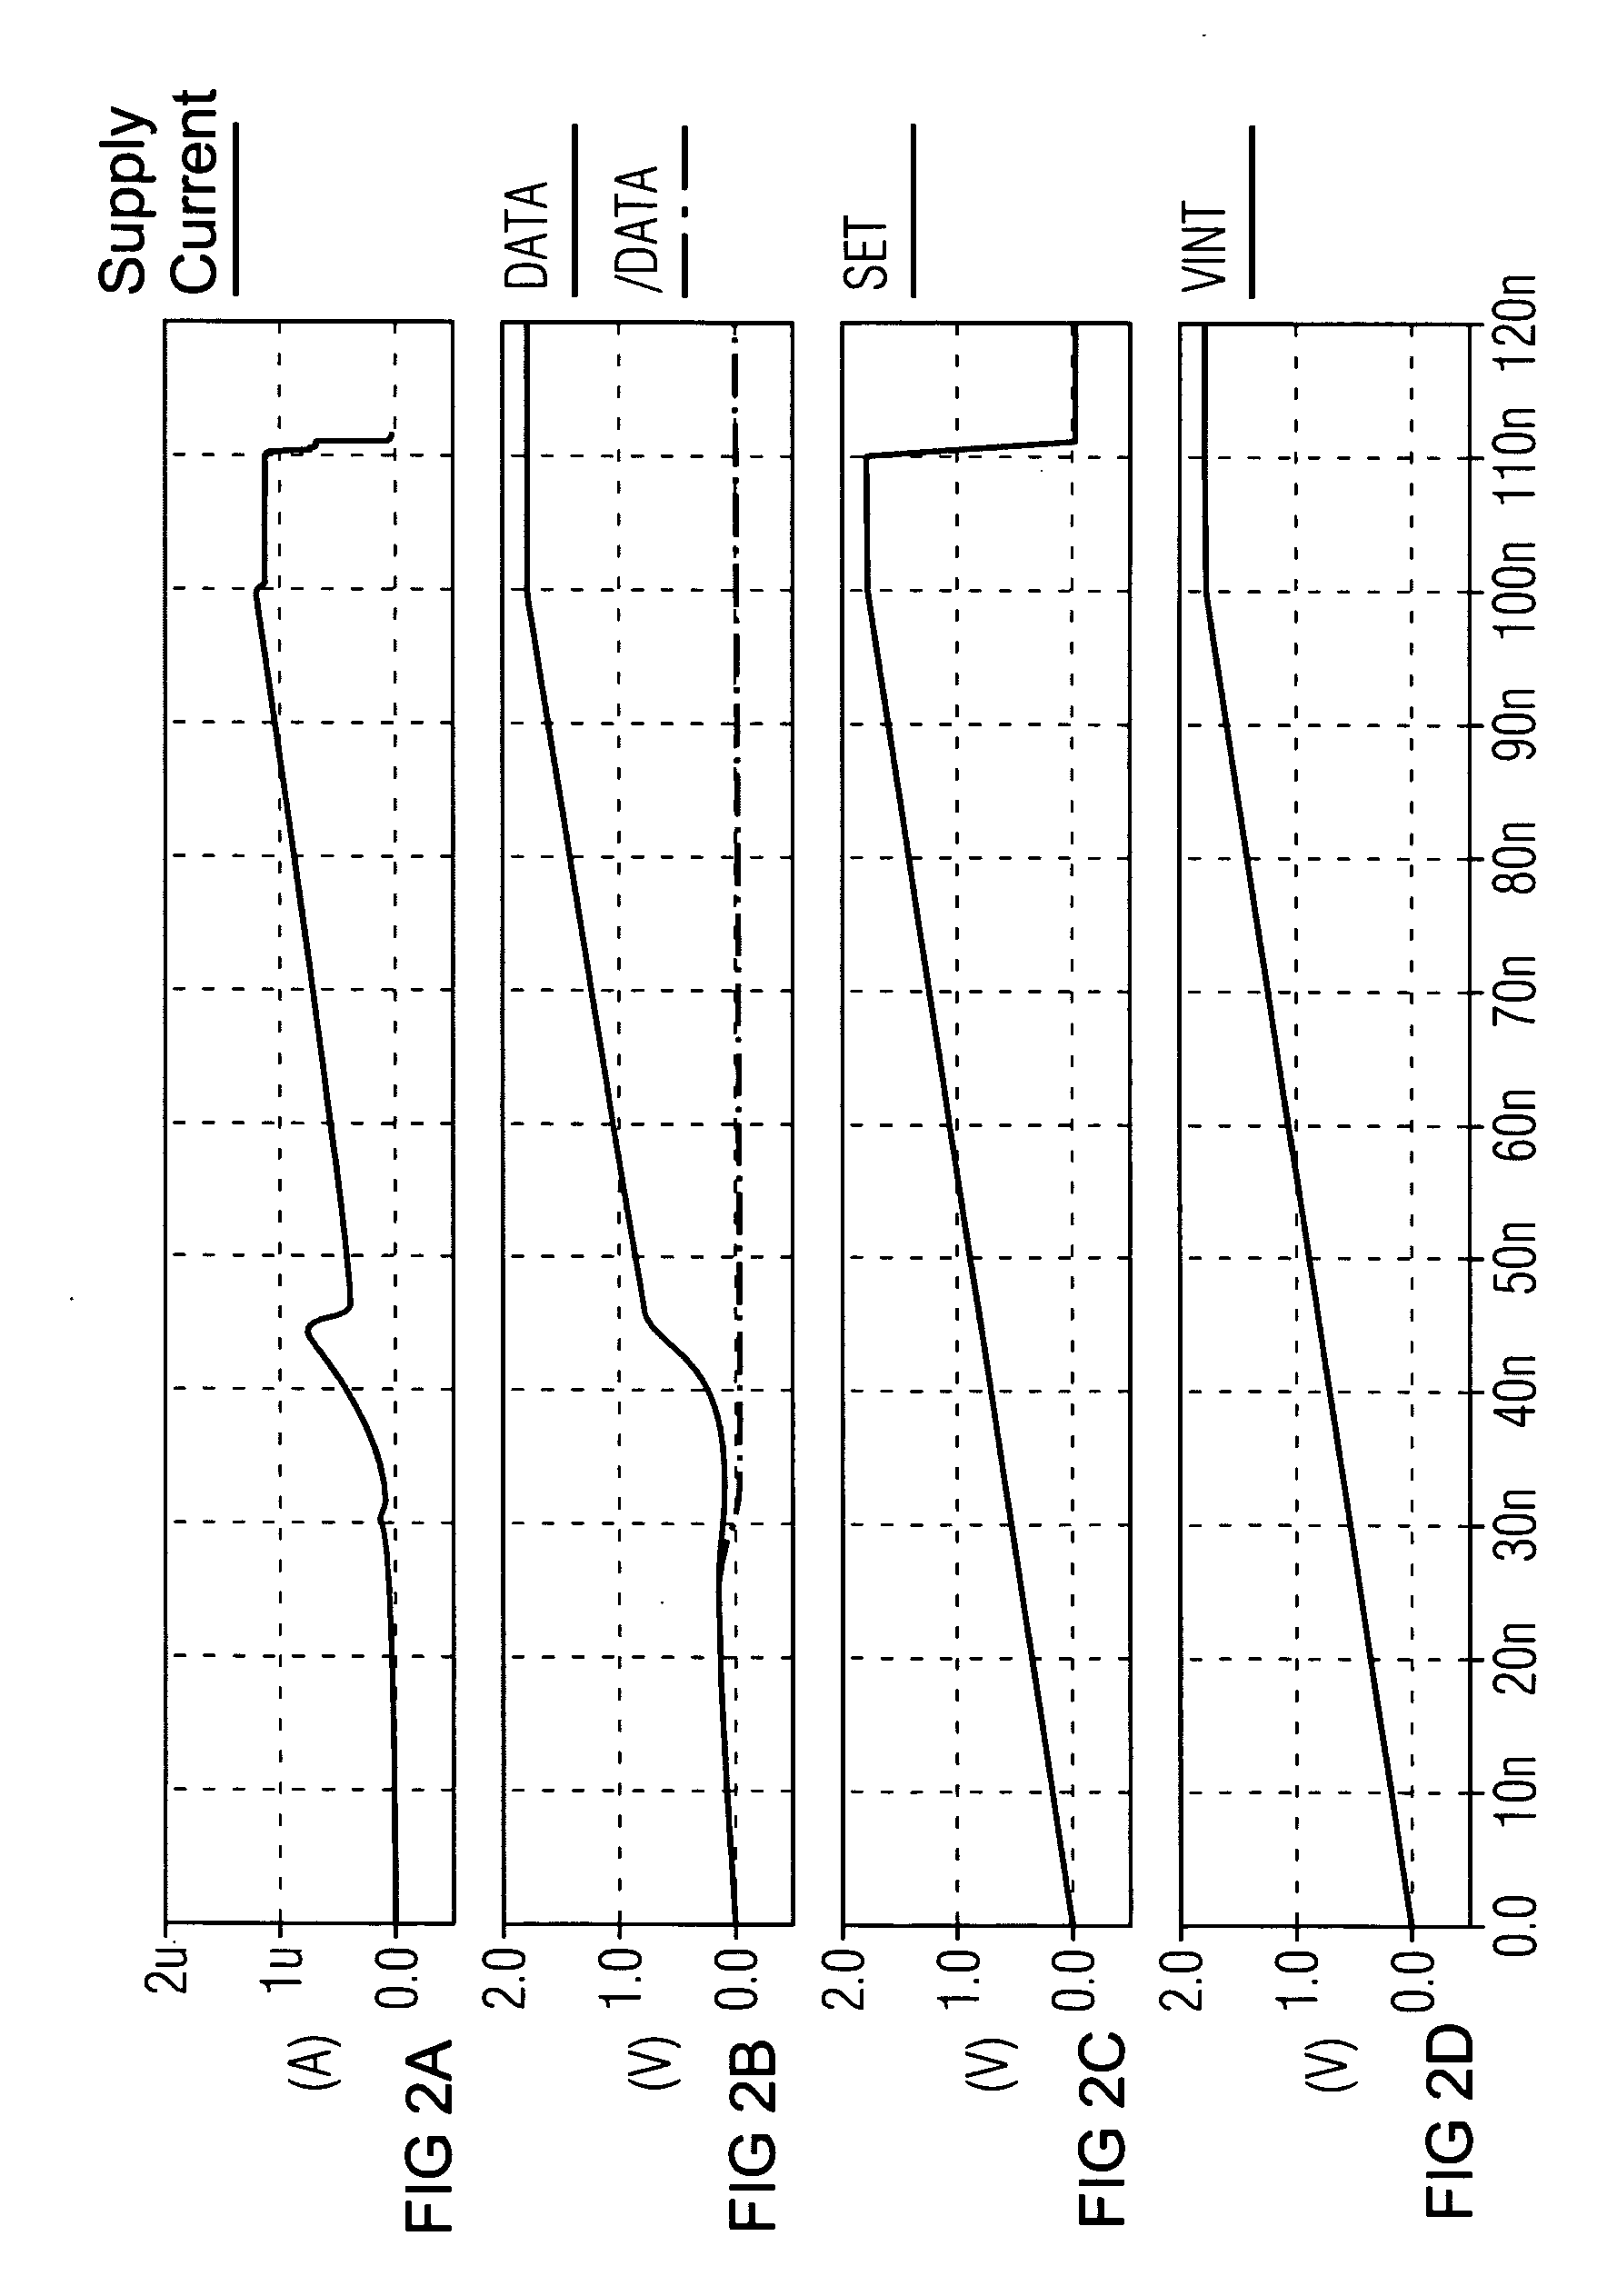 Non-volatile memory cell for storage of a data item in an integrated circuit